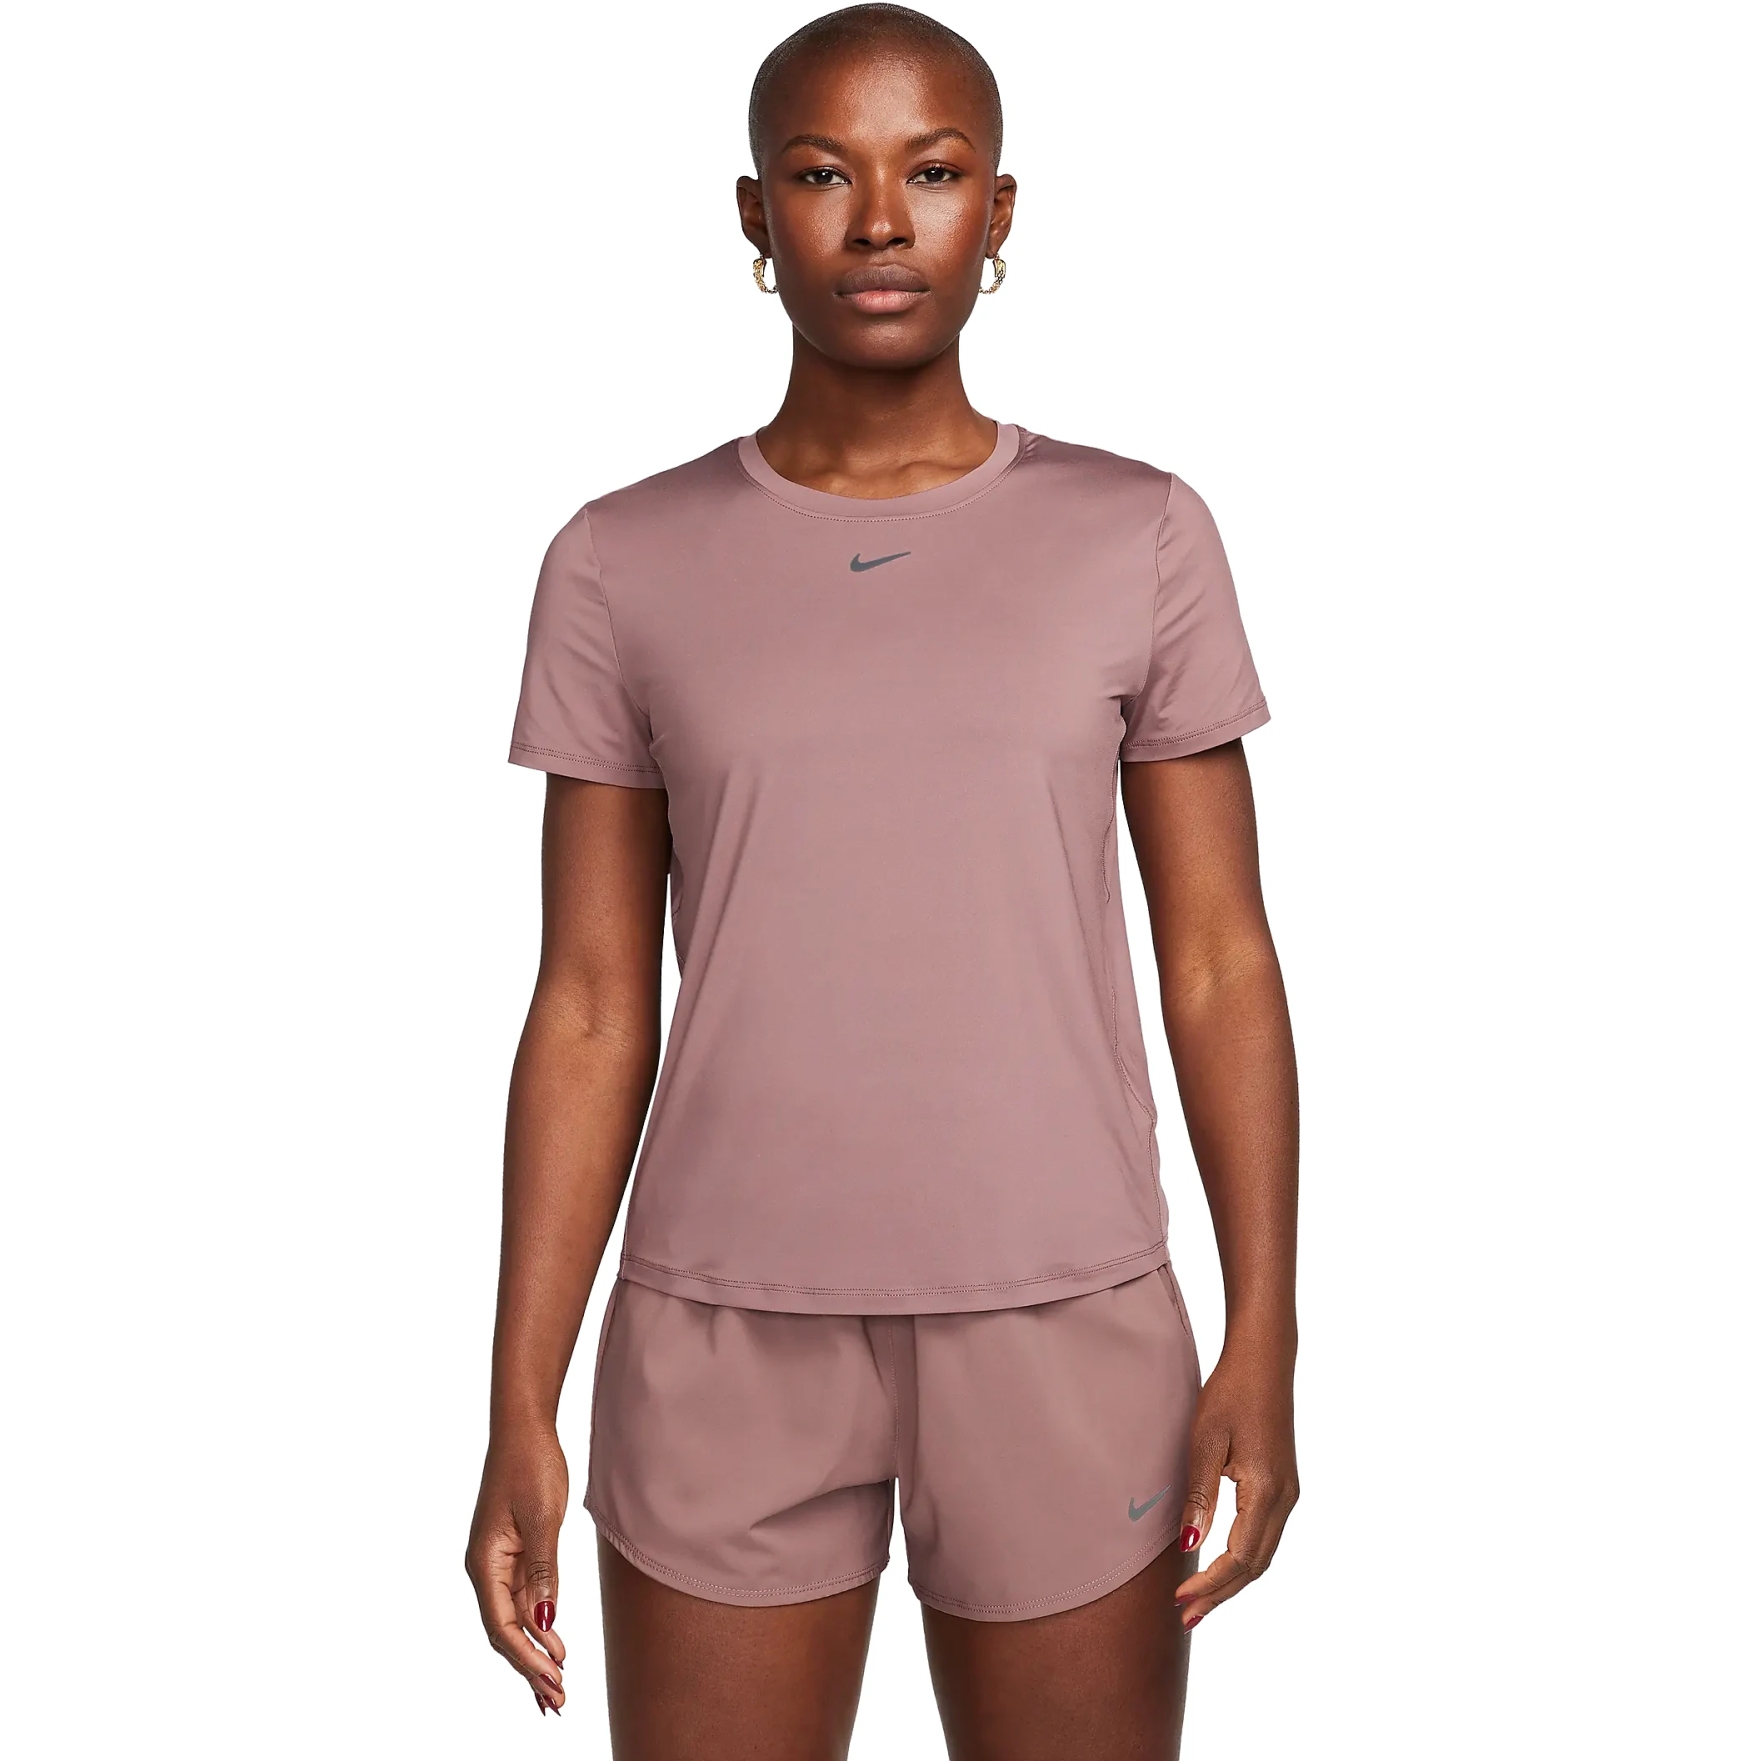 Picture of Nike One Classic Dri-FIT Short Sleeve Top Women - smokey mauve/black FN2798-208